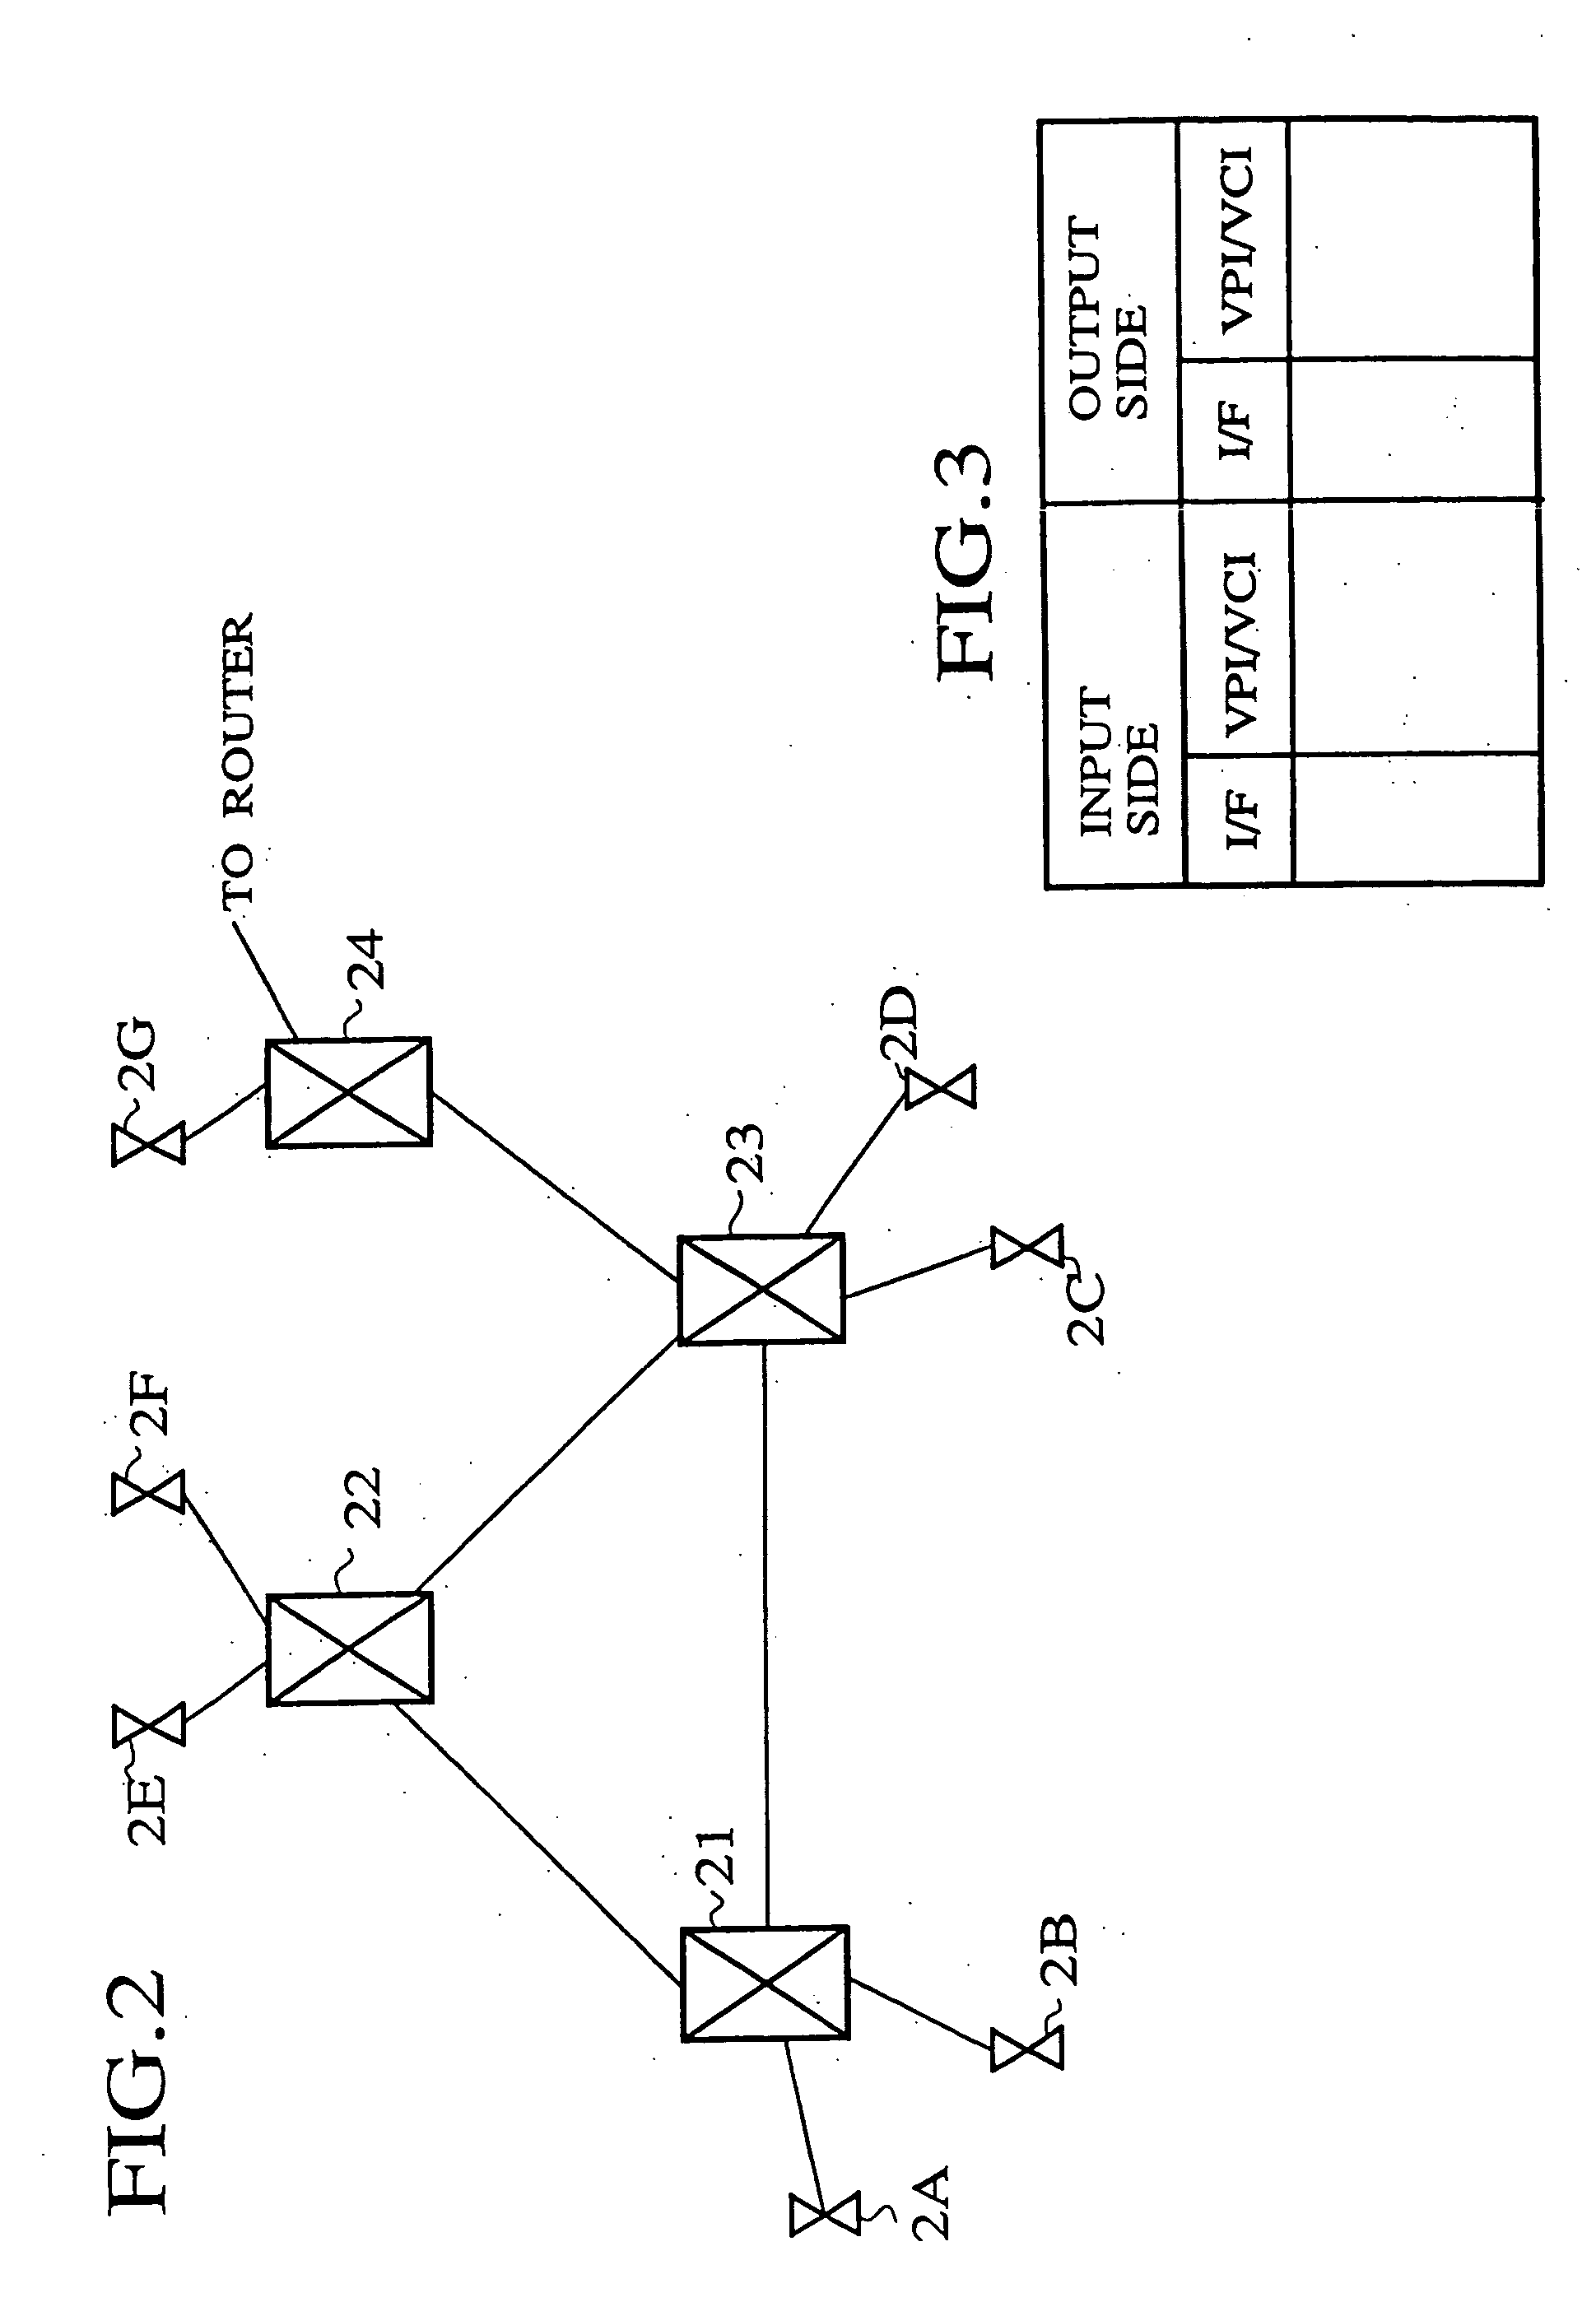 Network interconnection apparatus, network node apparatus, and packet transfer method for high speed, large capacity inter-network communication